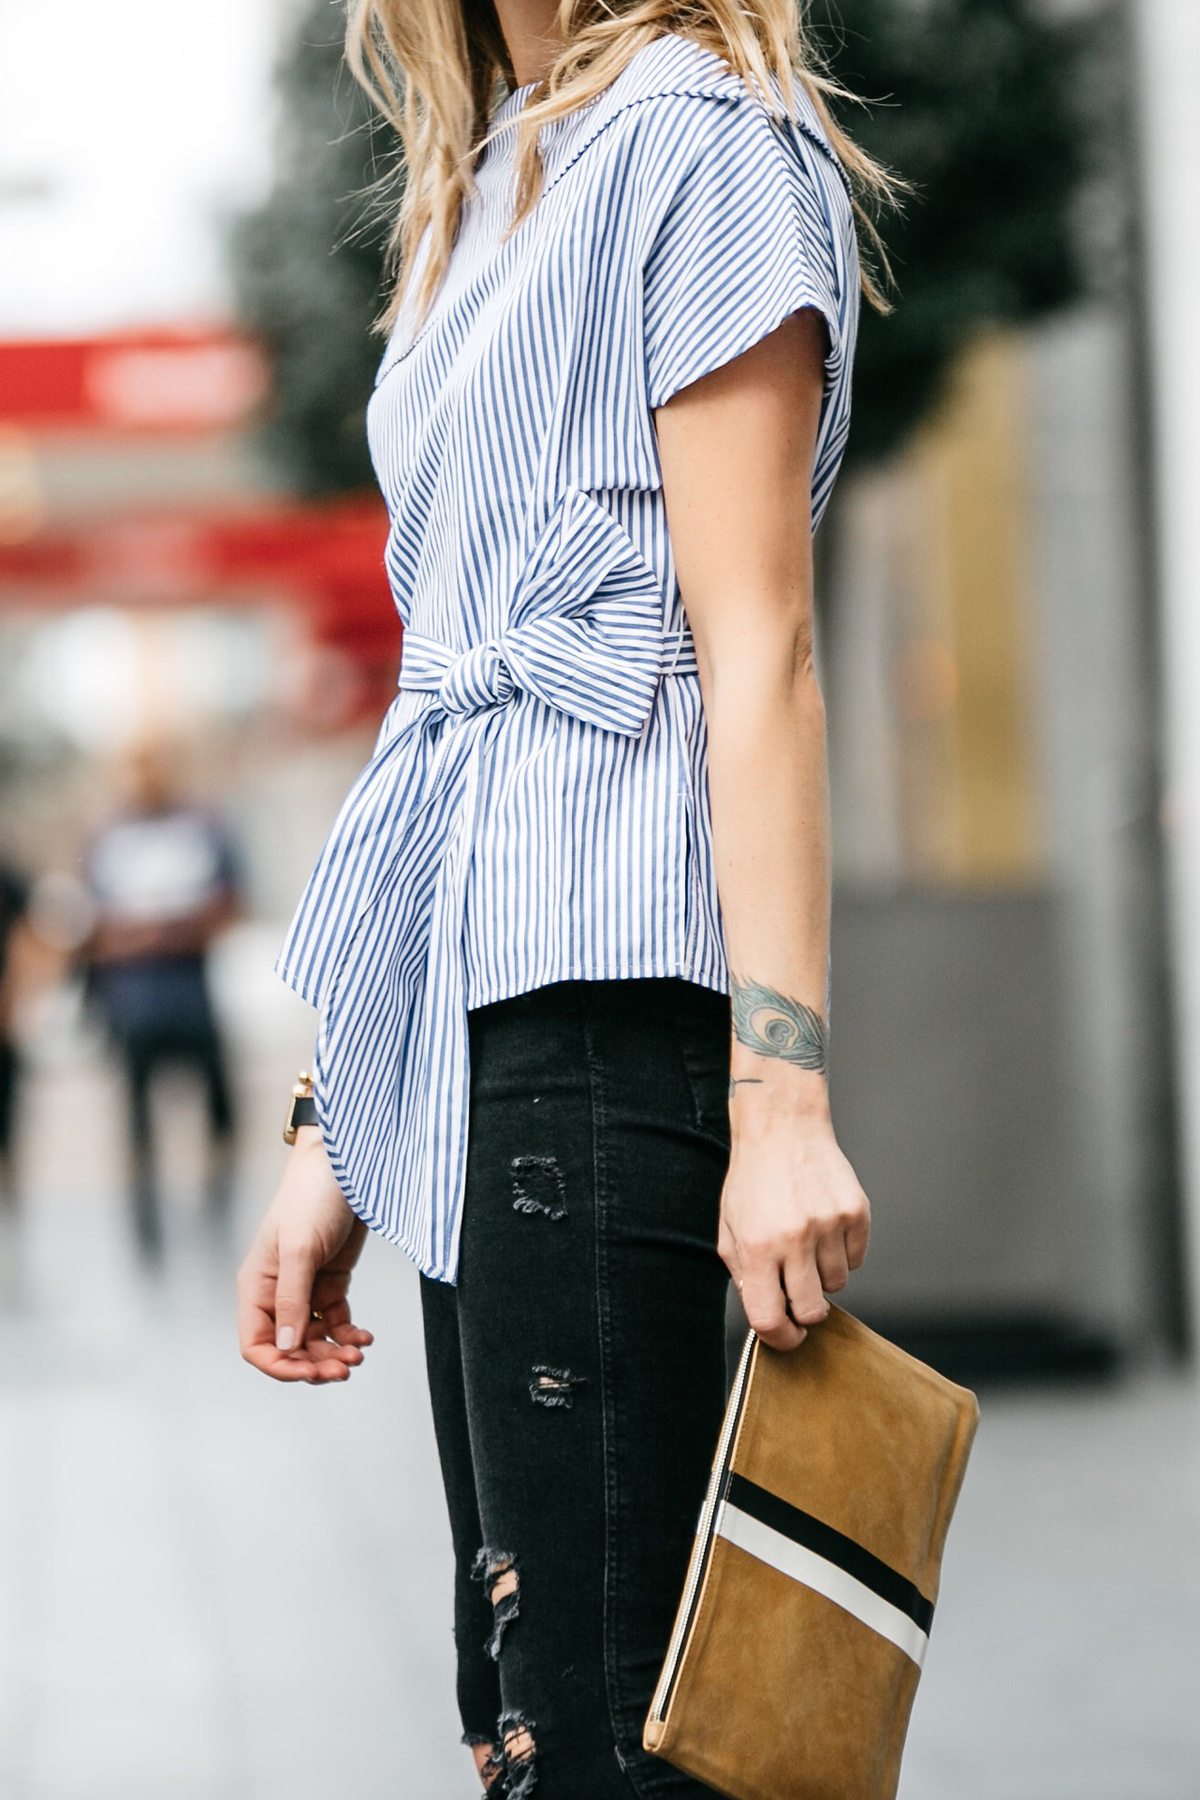 Fashion Jackson, Dallas Blogger, Street Style, Blue & White Stripe Off-the-Shoulder Top, Black Ripped Skinny Jeans, Clare V Stripe Flat Clutch